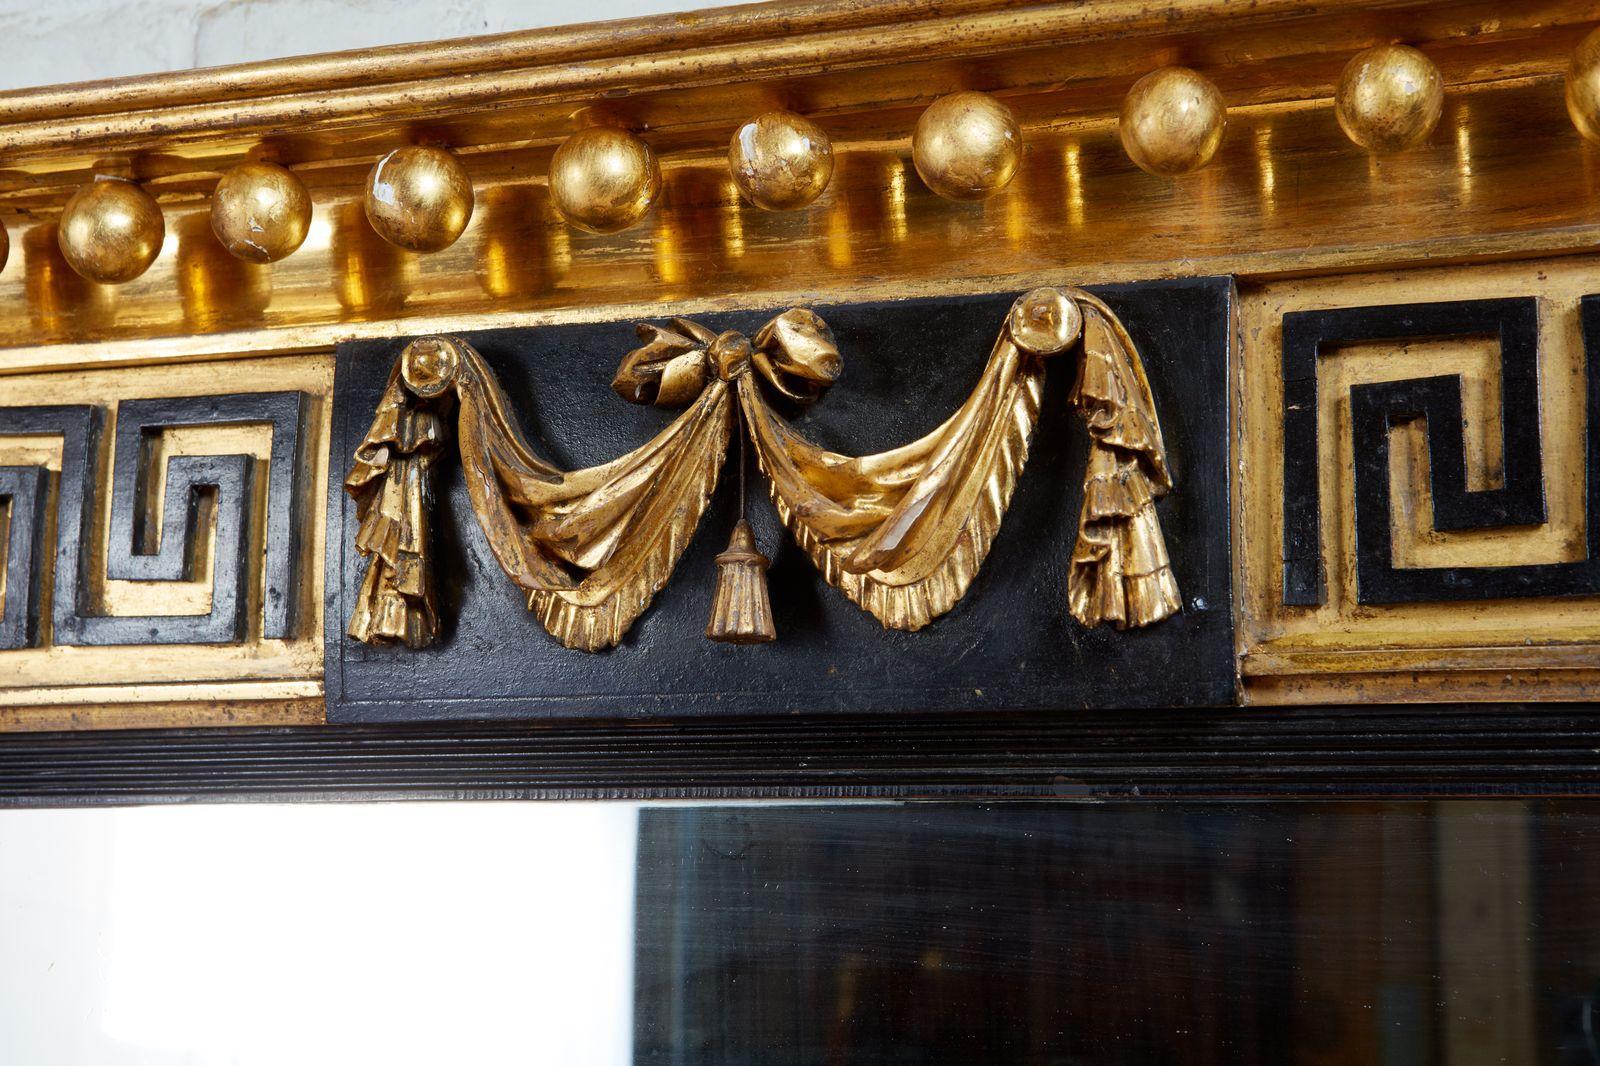 Fine early 19th century English gilt and ebonized wood triple plate overmantel mirror, the stepped pediment with brightly burnished gilt balls, the center tablet having swagged drapes surmounted by ebonized Greek key applied ornament flanked by